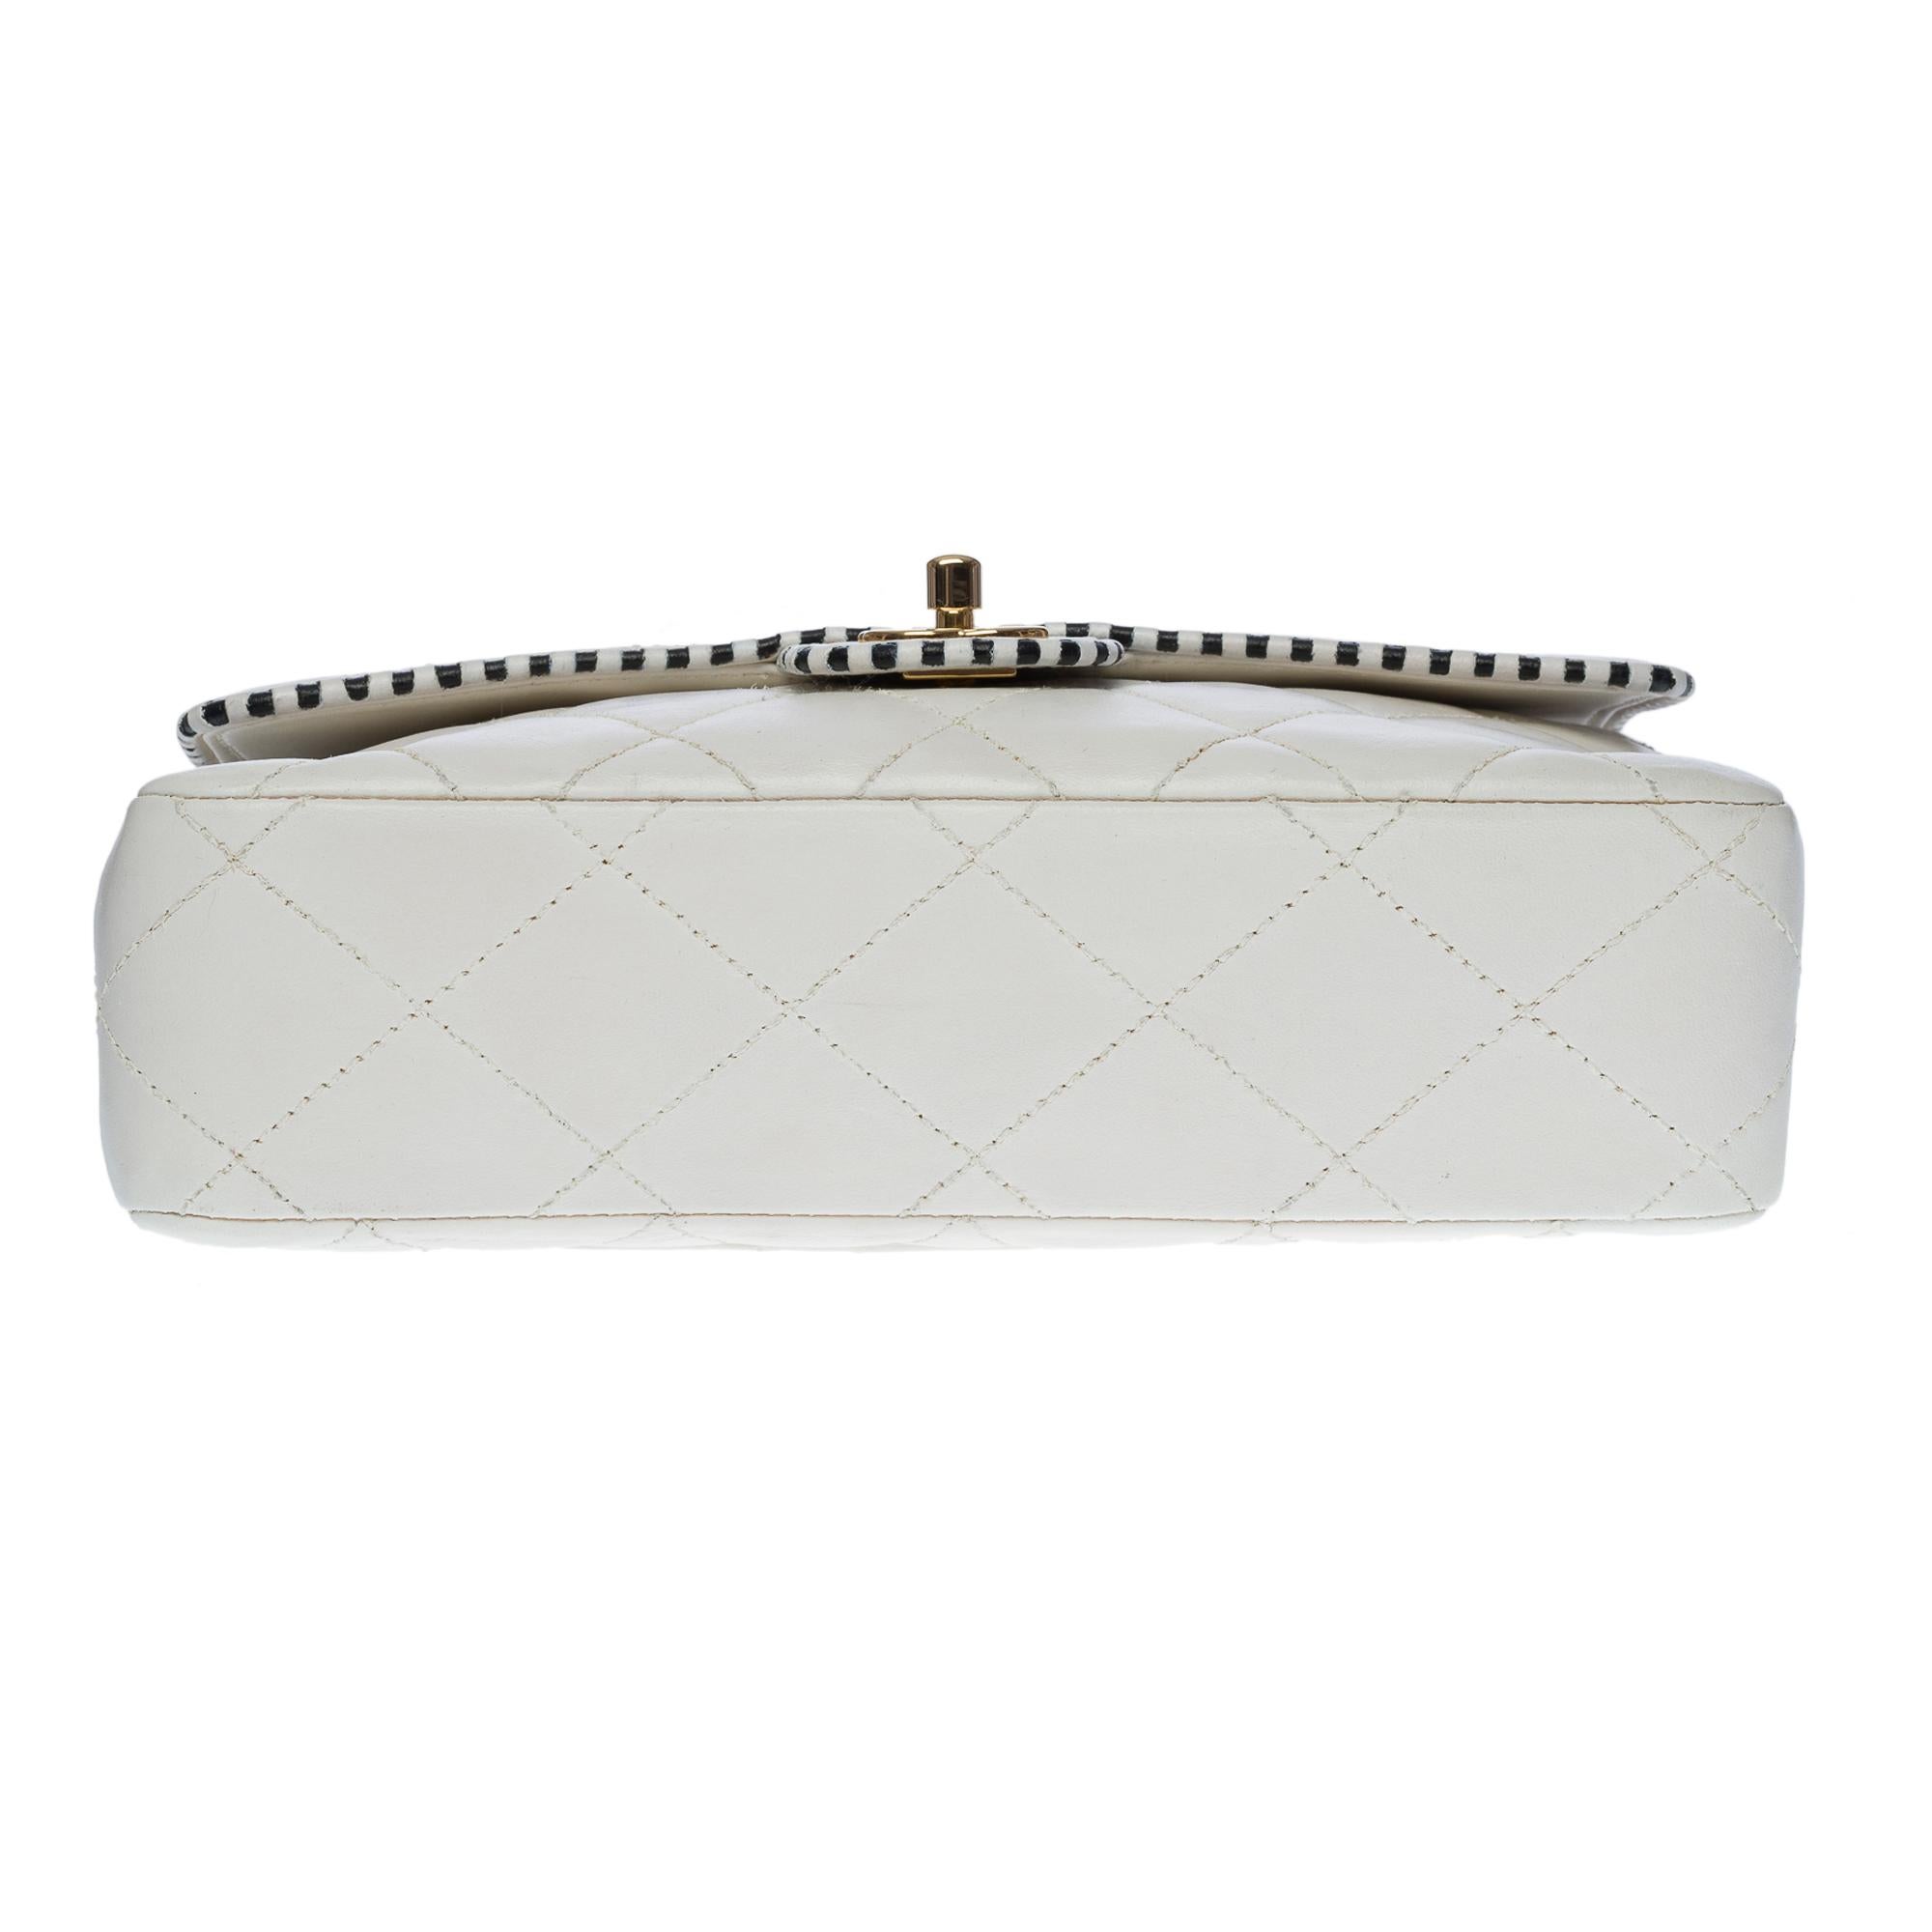 Chanel Timeless Medium single flap shoulder bag in white quilted leather, GHW For Sale 5